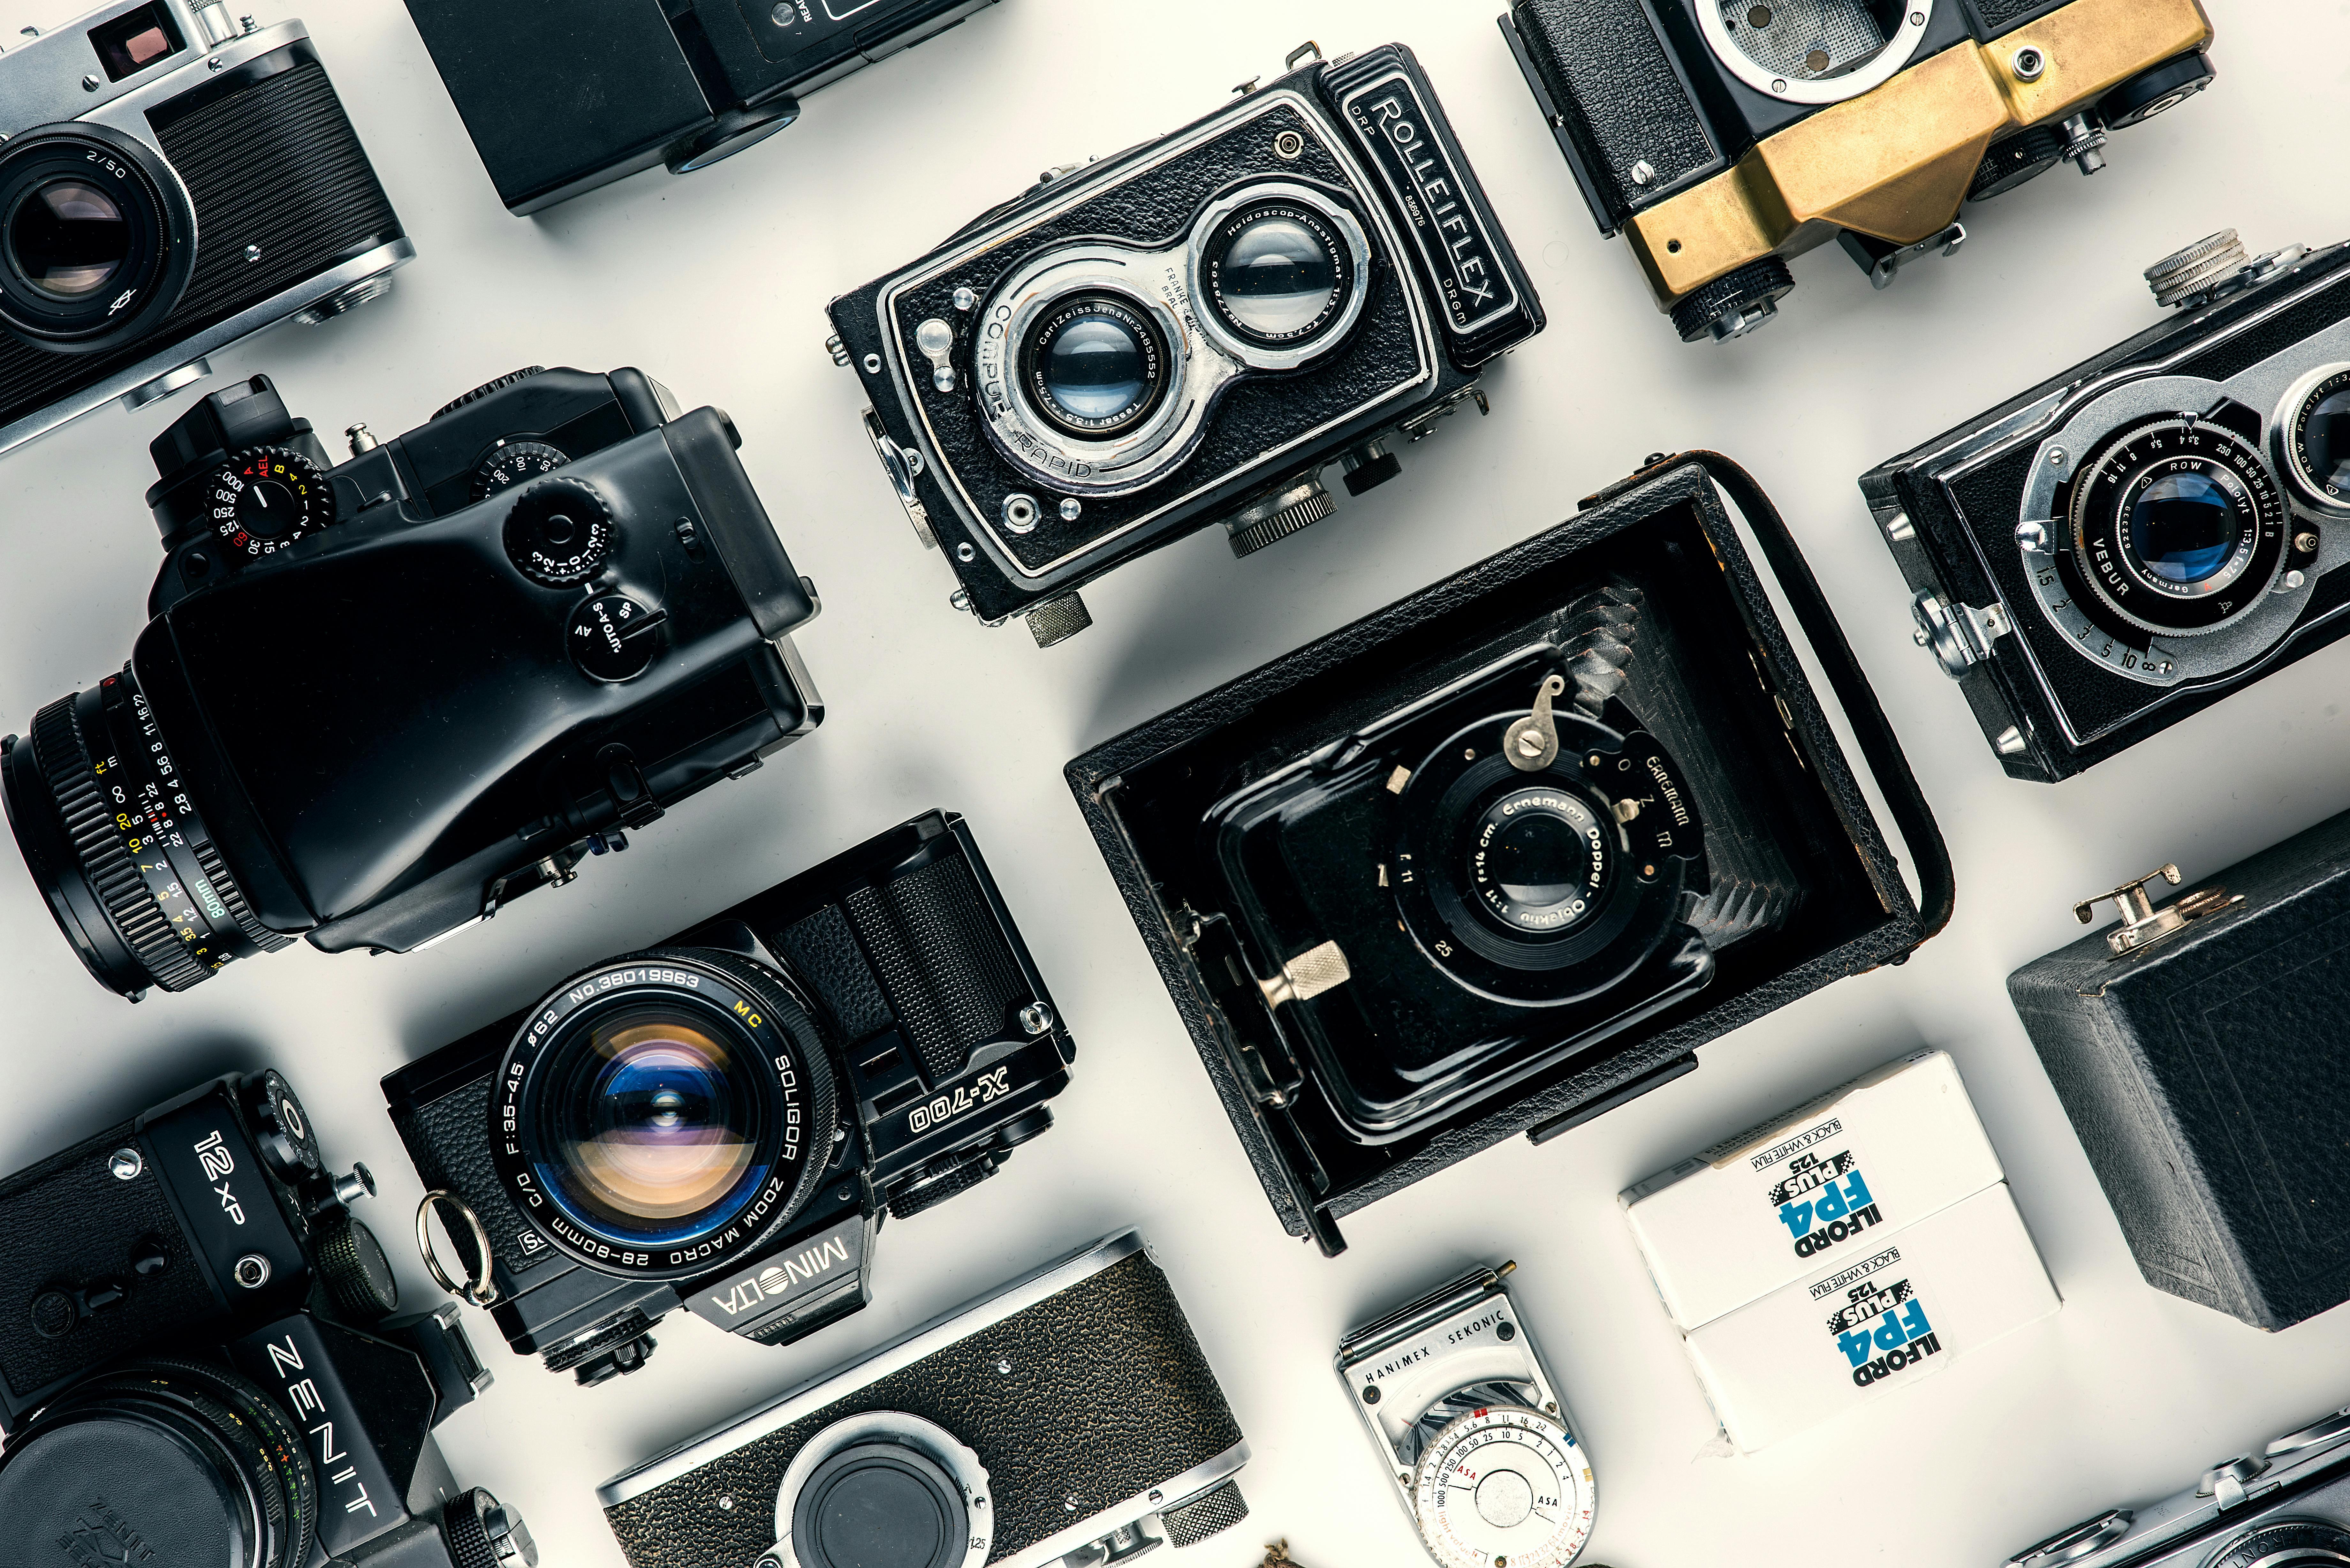 A variety of vintage cameras arranged on a white surface.